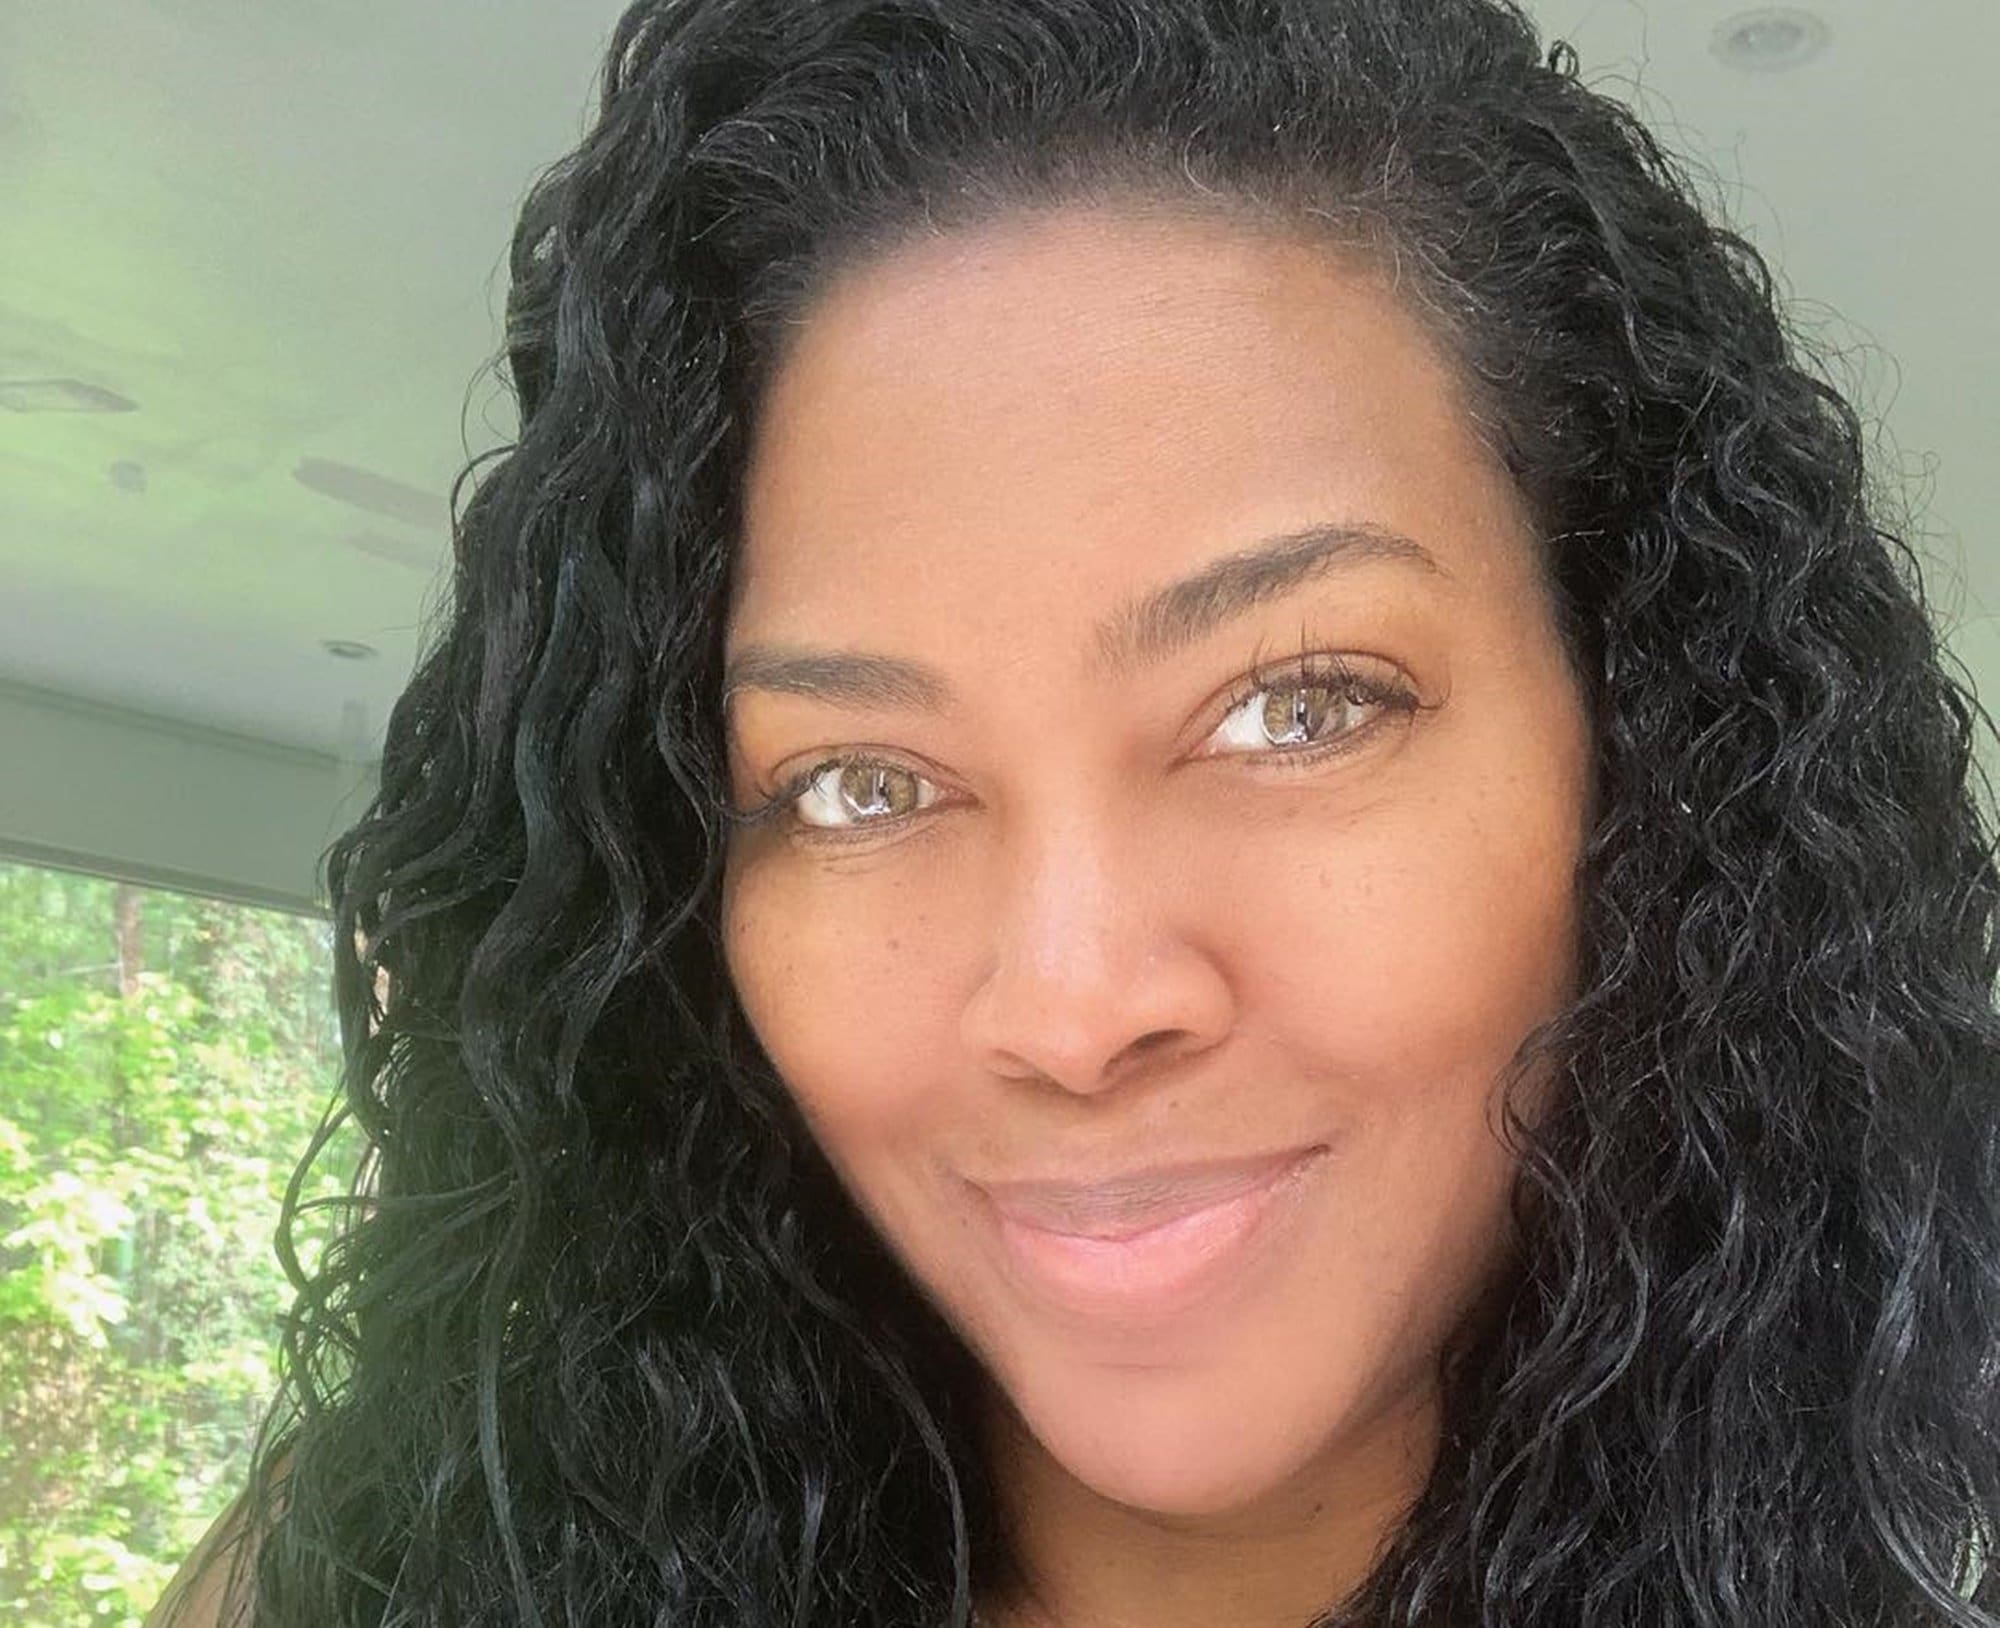 Kenya Moore Looks Hot And Happy One Her Way To Buy Some Groceries - Check Out Her Completely Bare Face In The Video